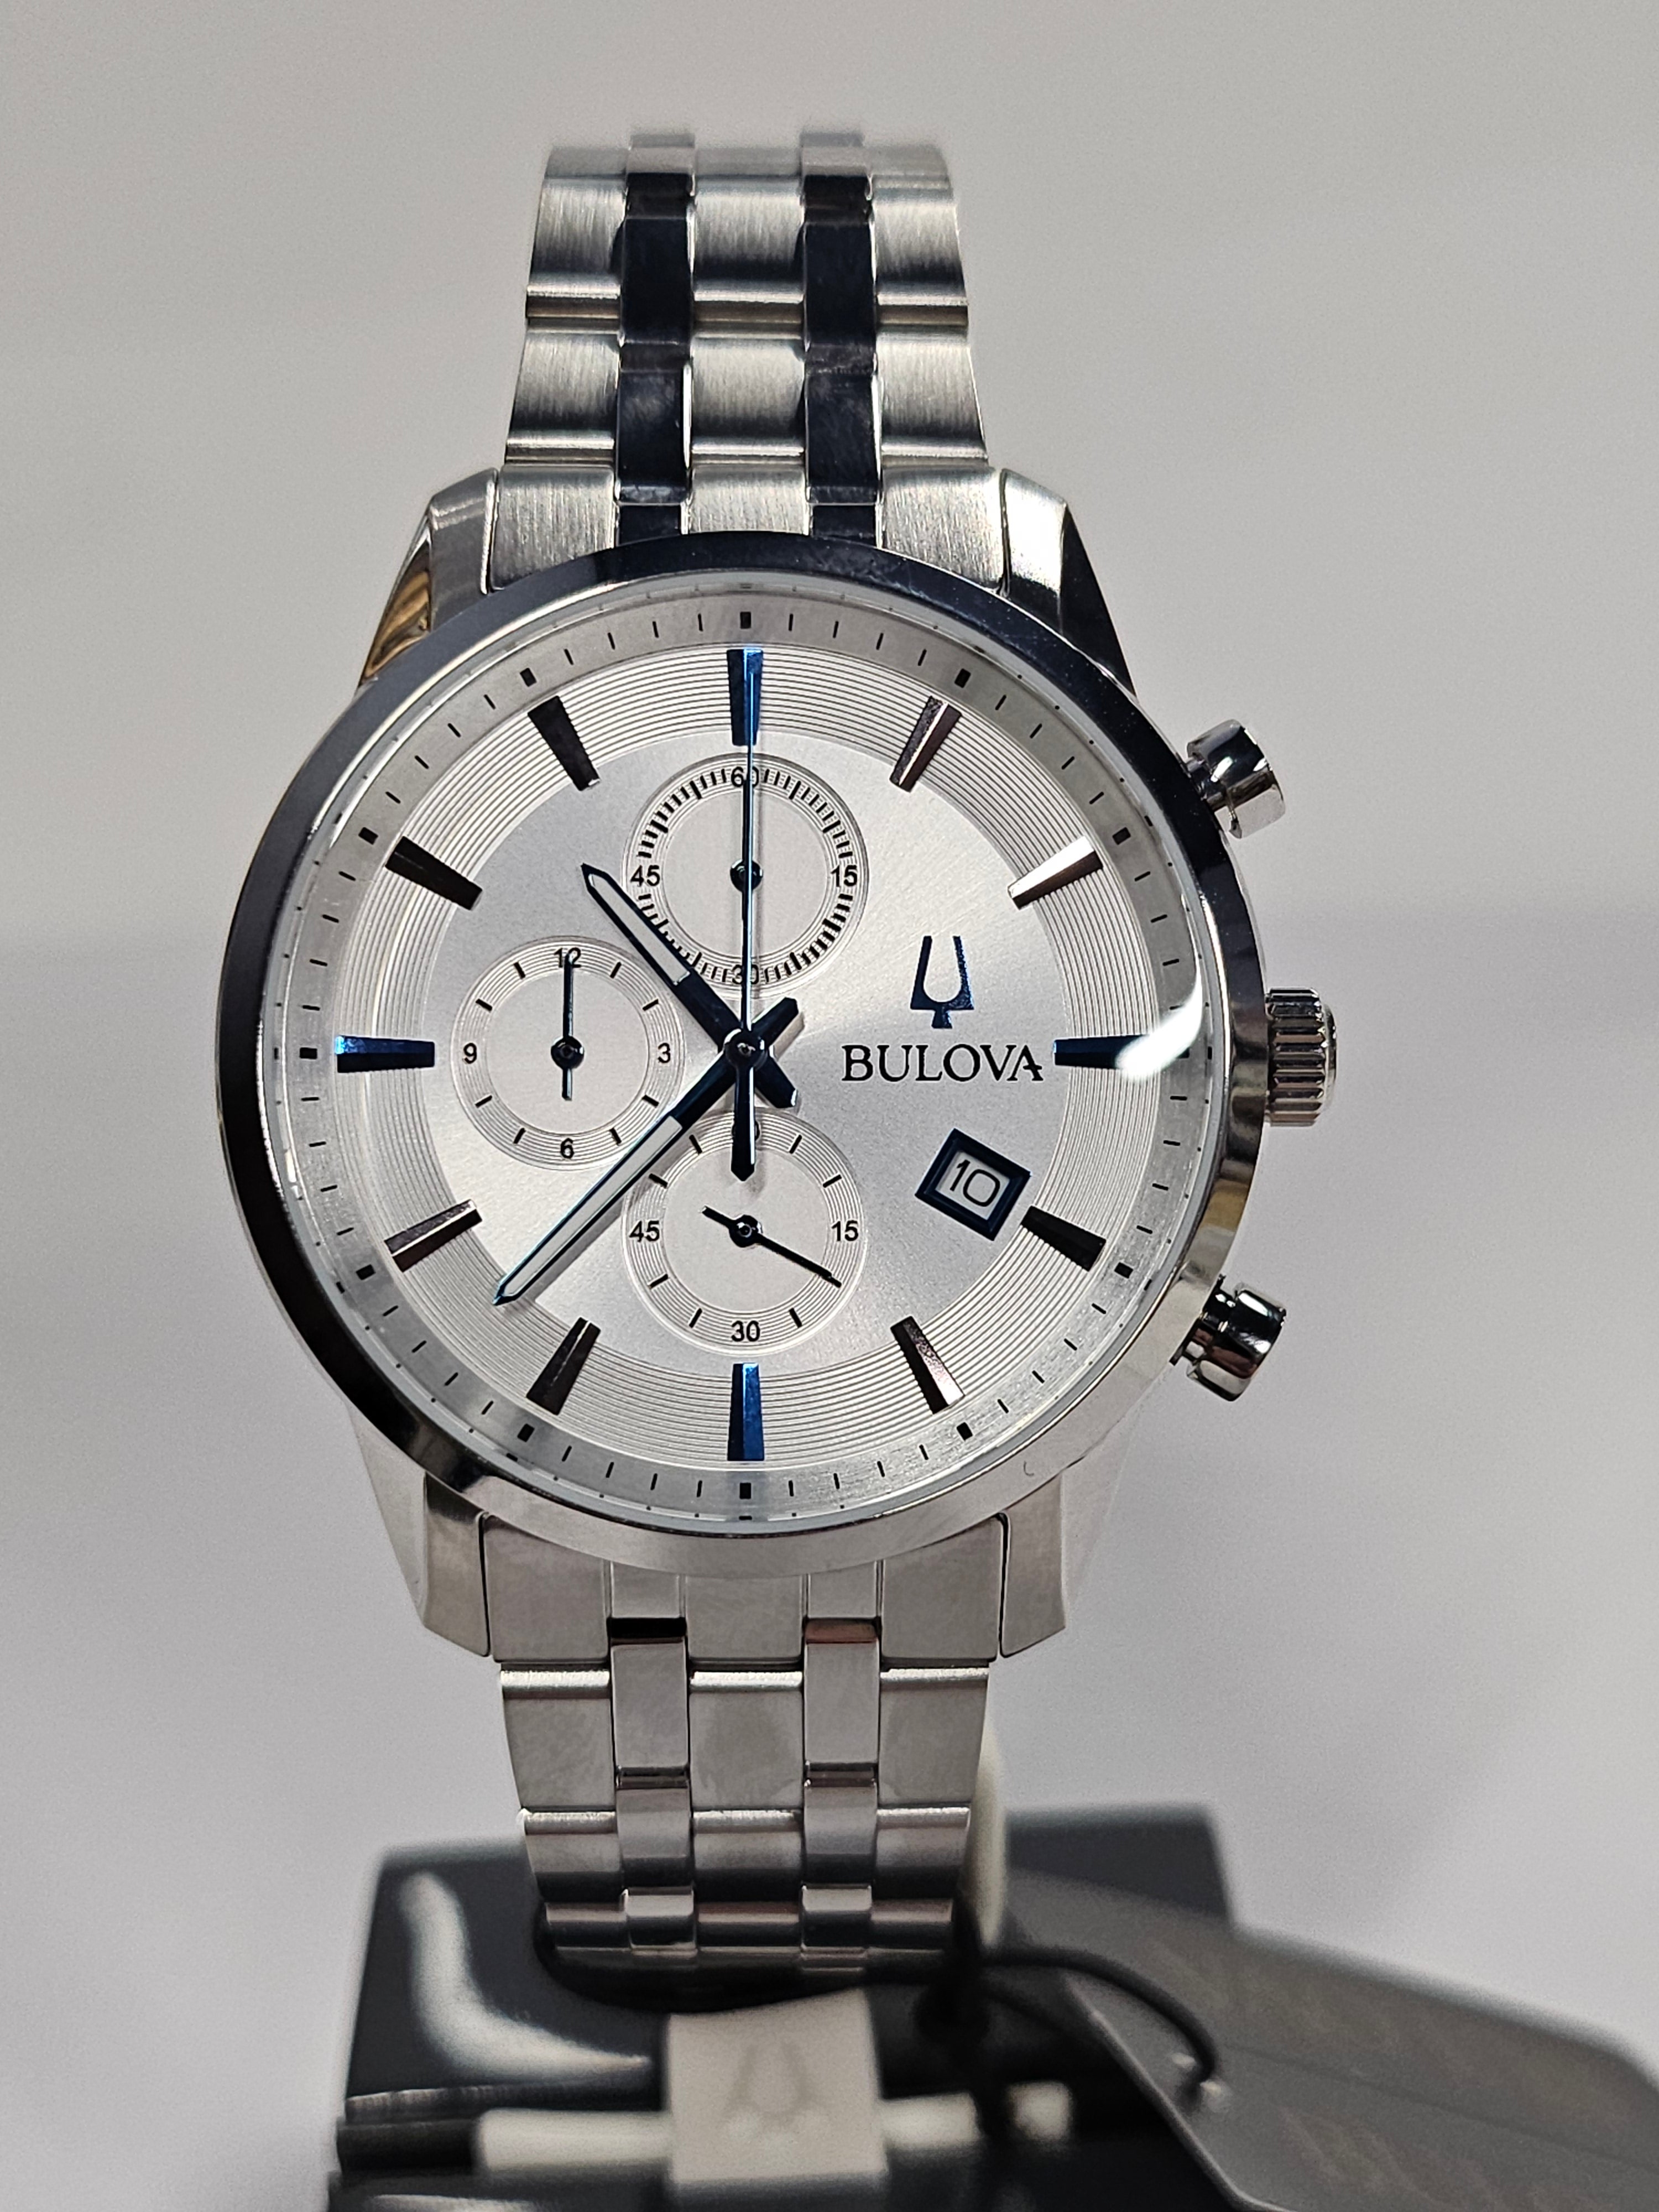 Bulova Silver-Tone Stainless Steel Chronograph Watch - 96A404 (Sutton)